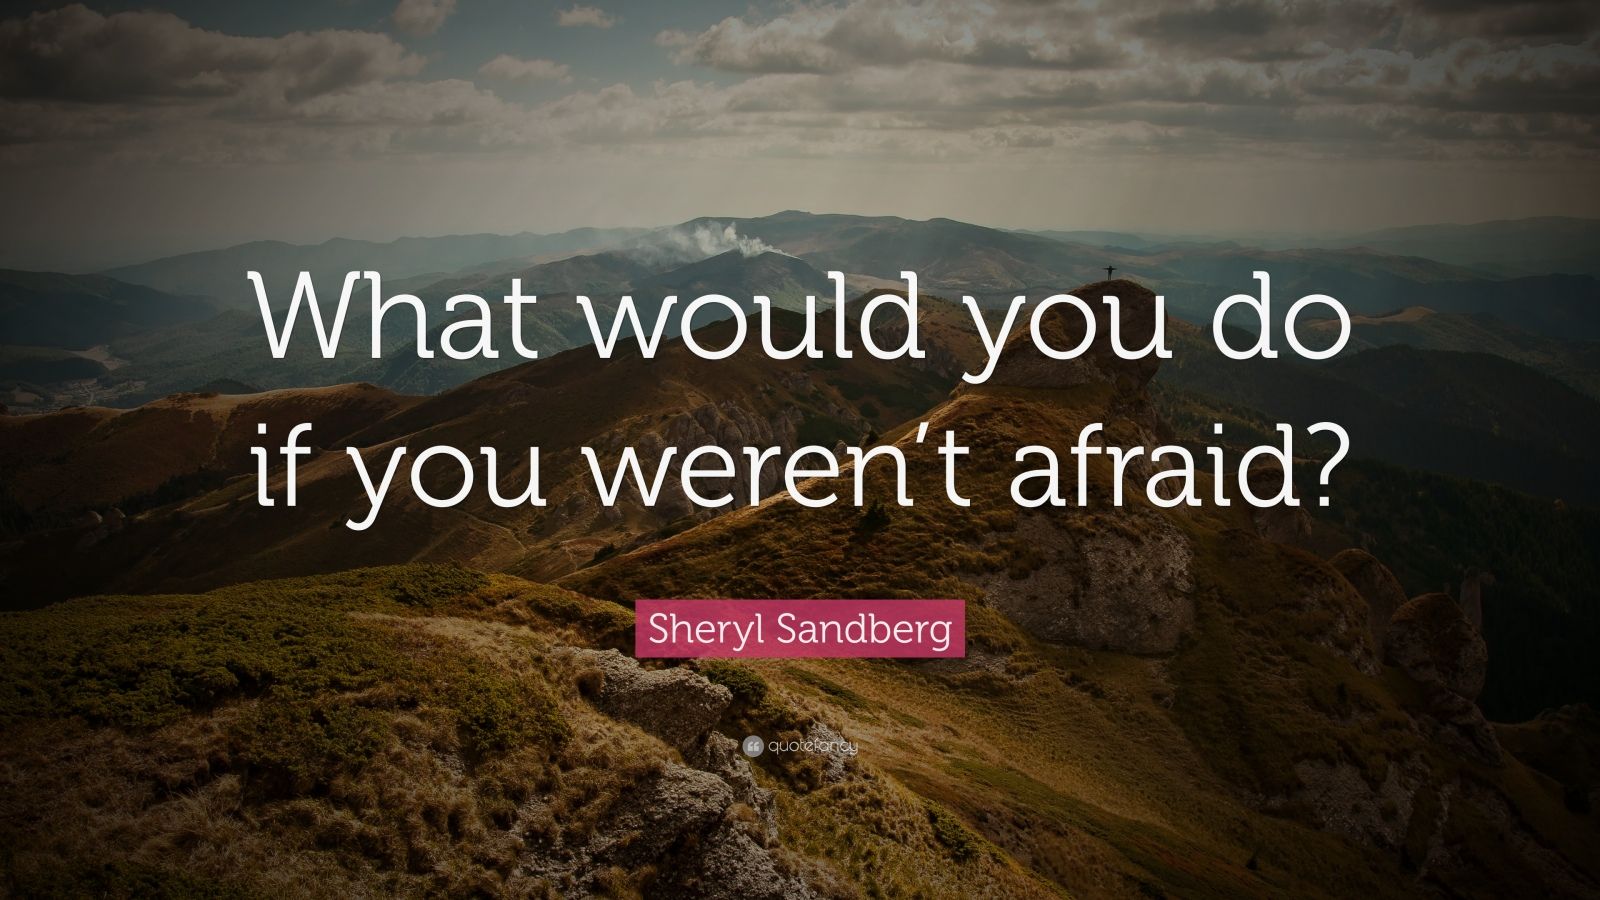 Sheryl Sandberg Quote: “What would you do if you weren’t afraid?”